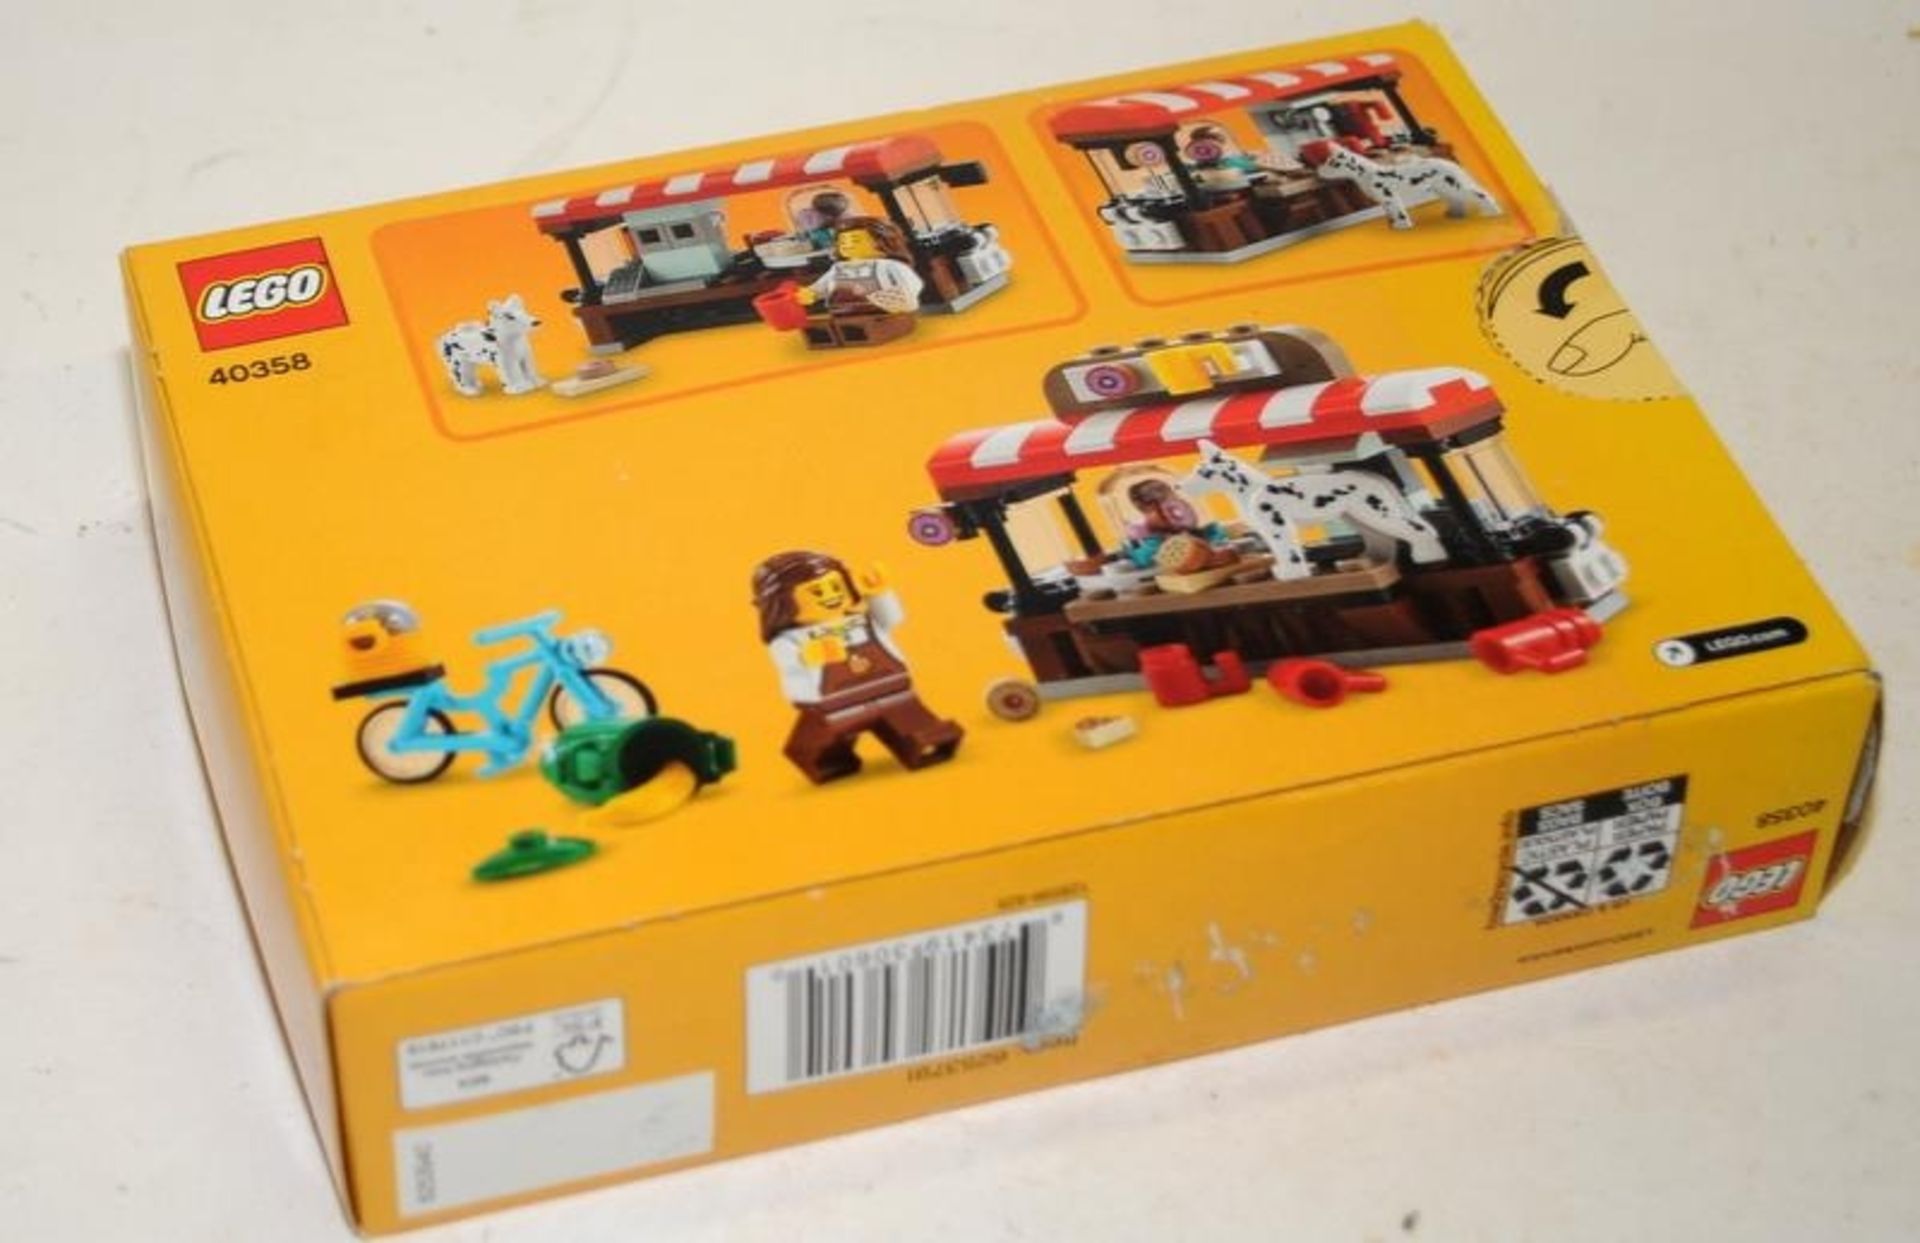 Vintage Lego boxed set: Bean There, Donut That ref:40358. Rare set, available only in the US - Image 2 of 3